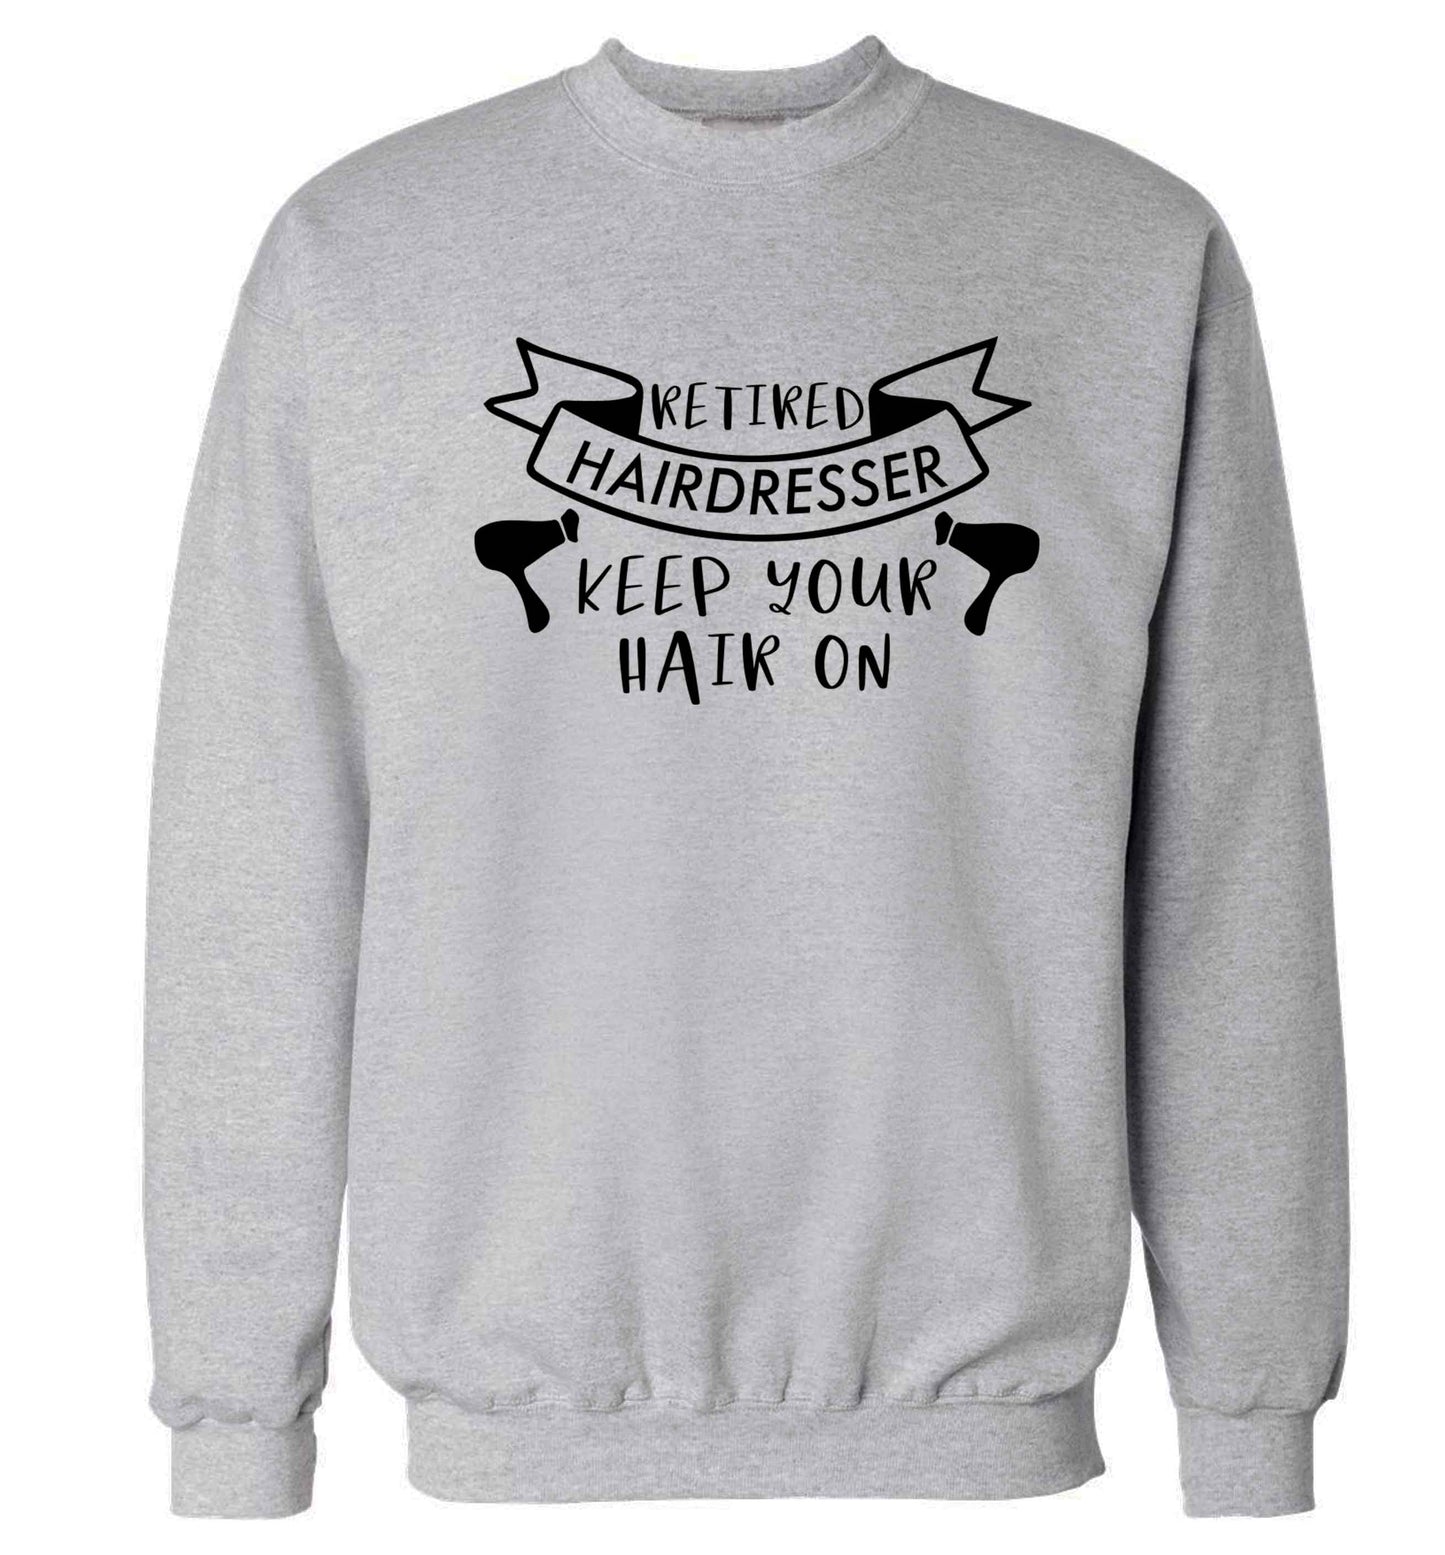 Retired hairdresser keep your hair on Adult's unisex grey Sweater 2XL